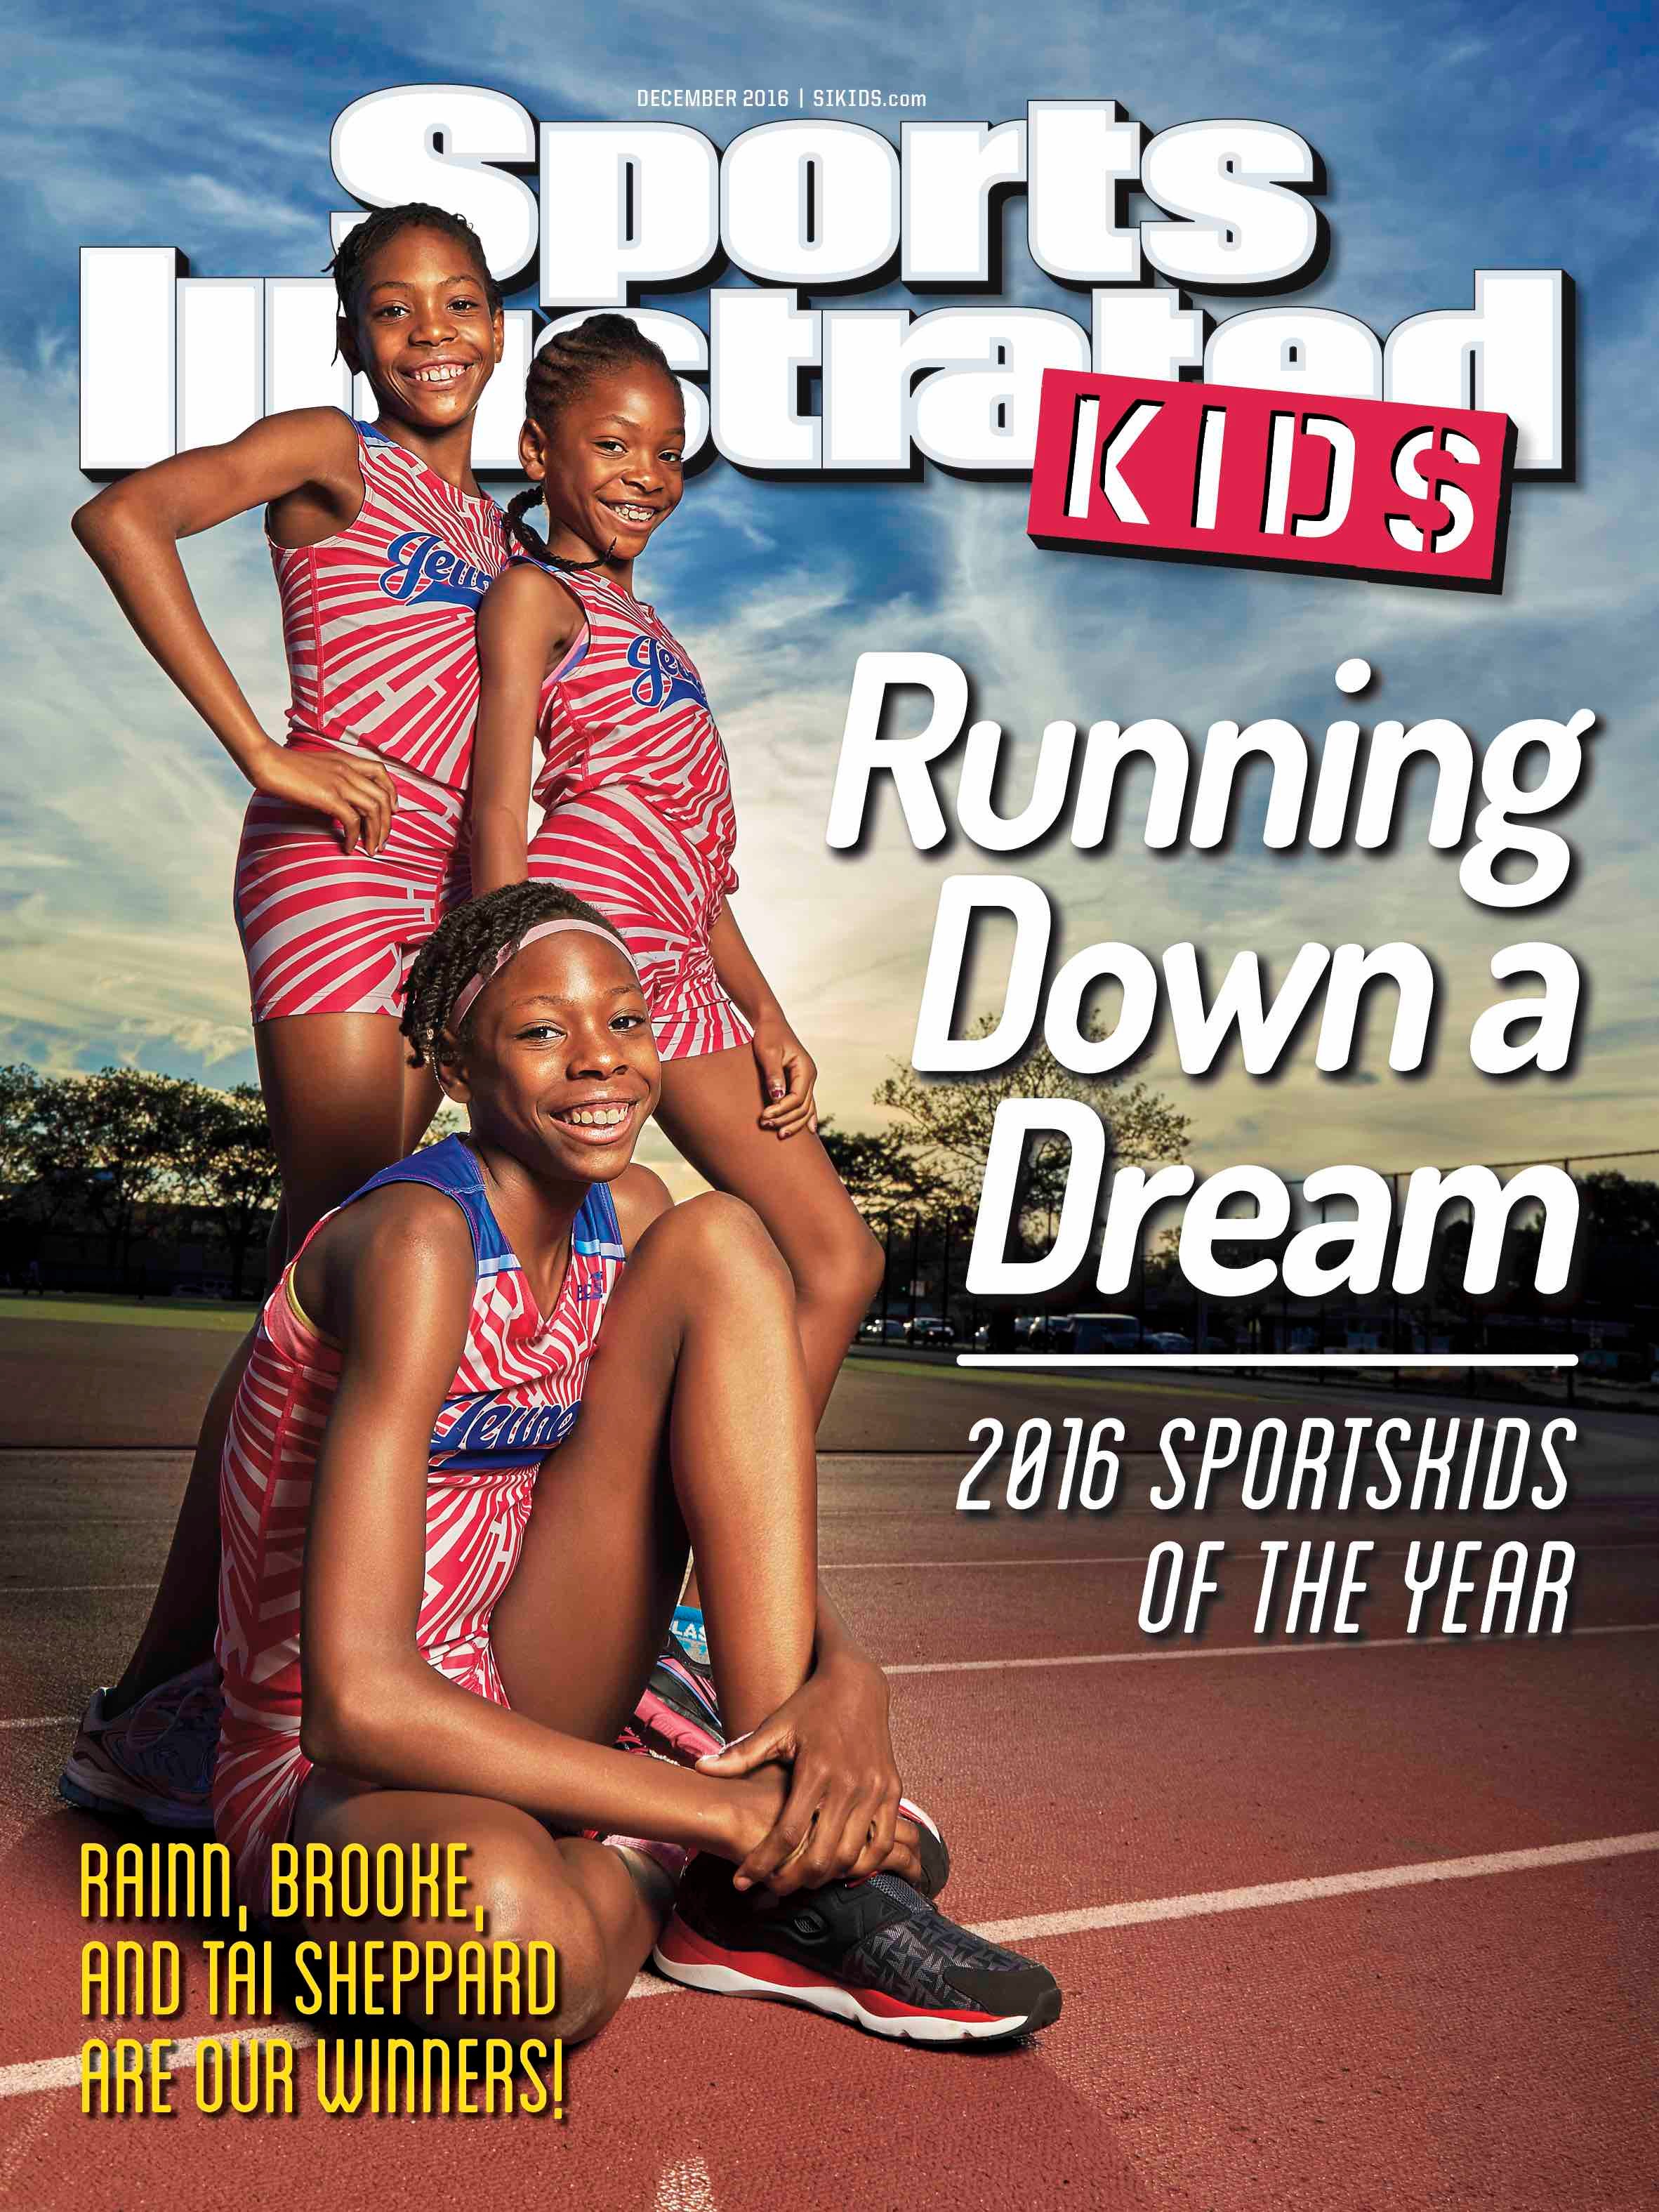 Black Girl Magic: The Sheppard Sisters Are The 2016 Sports Illustrated SportsKids Of The Year!